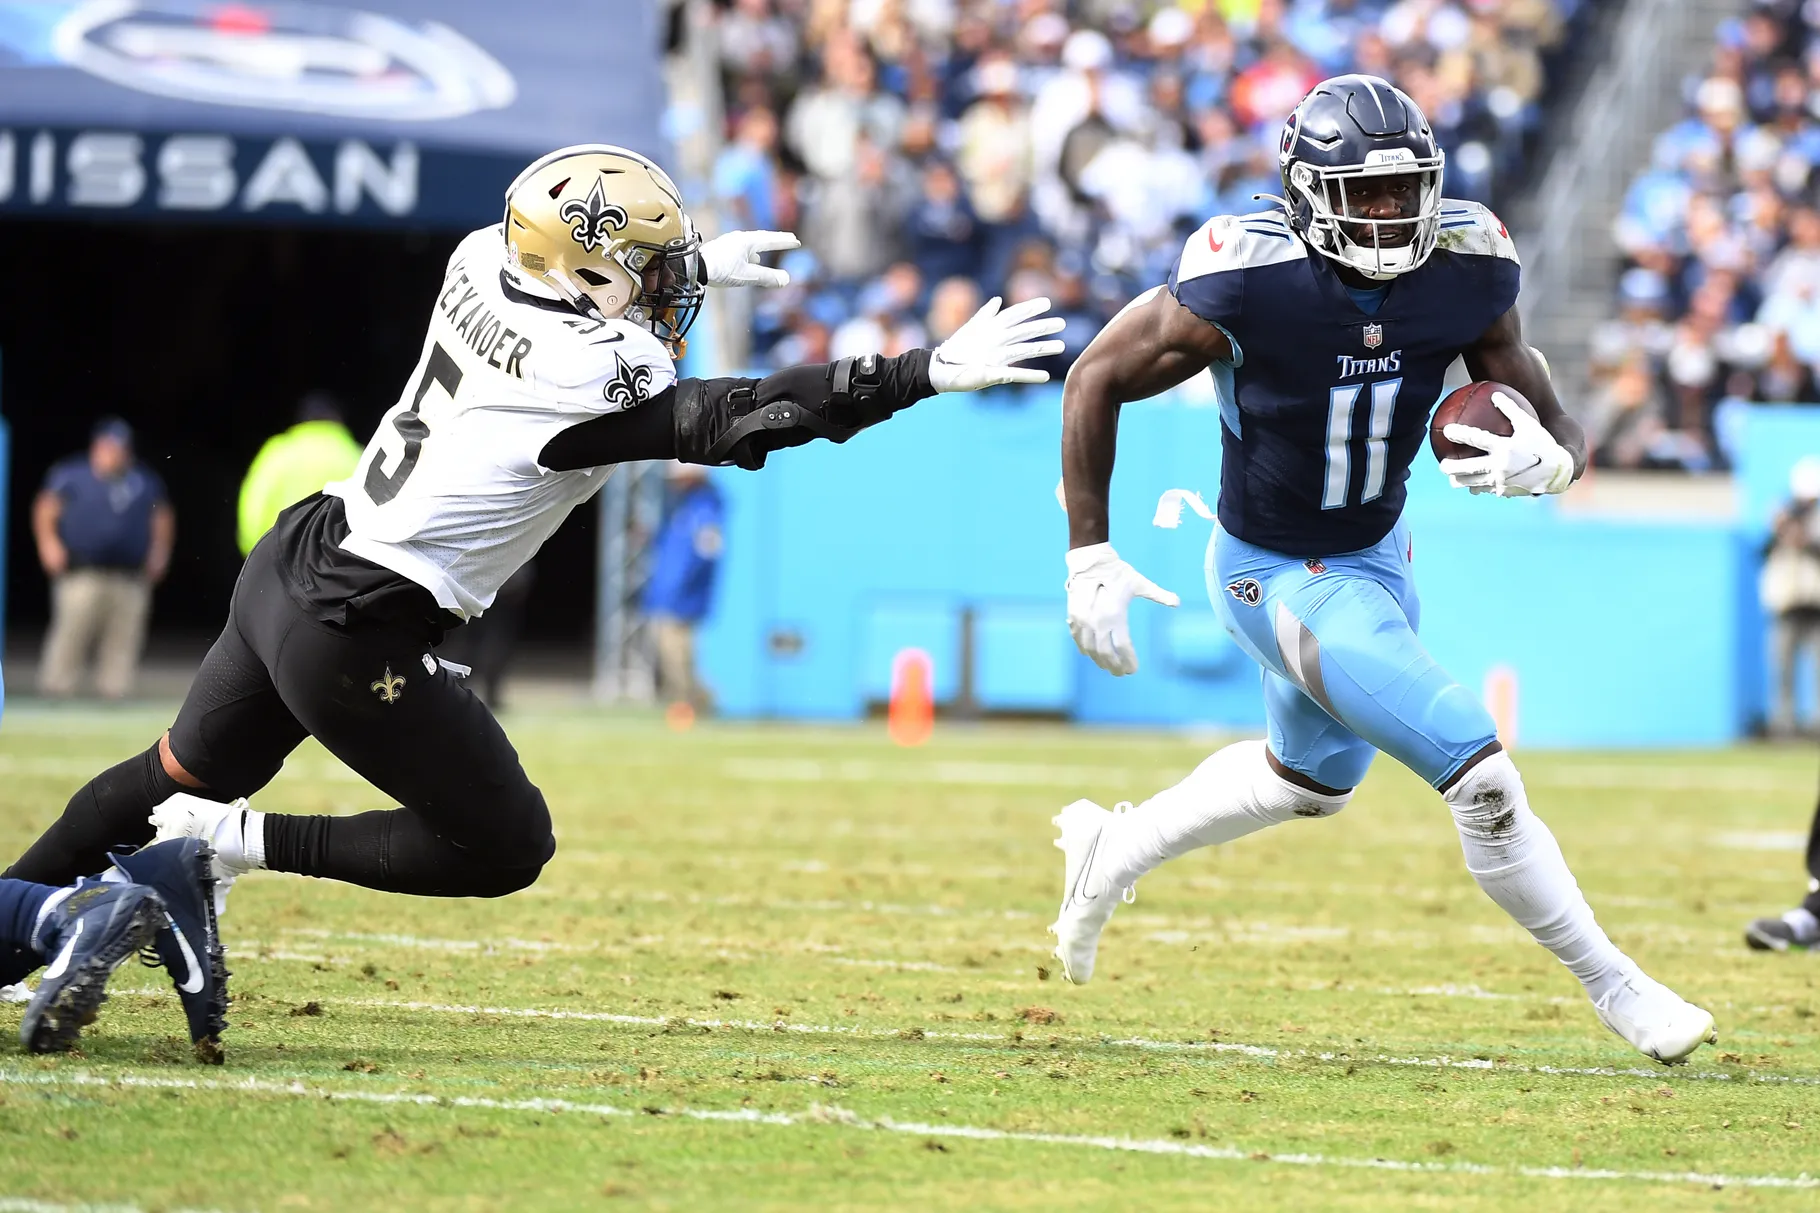 NFL Draft: Eagles acquire A.J. Brown from Titans for draft picks